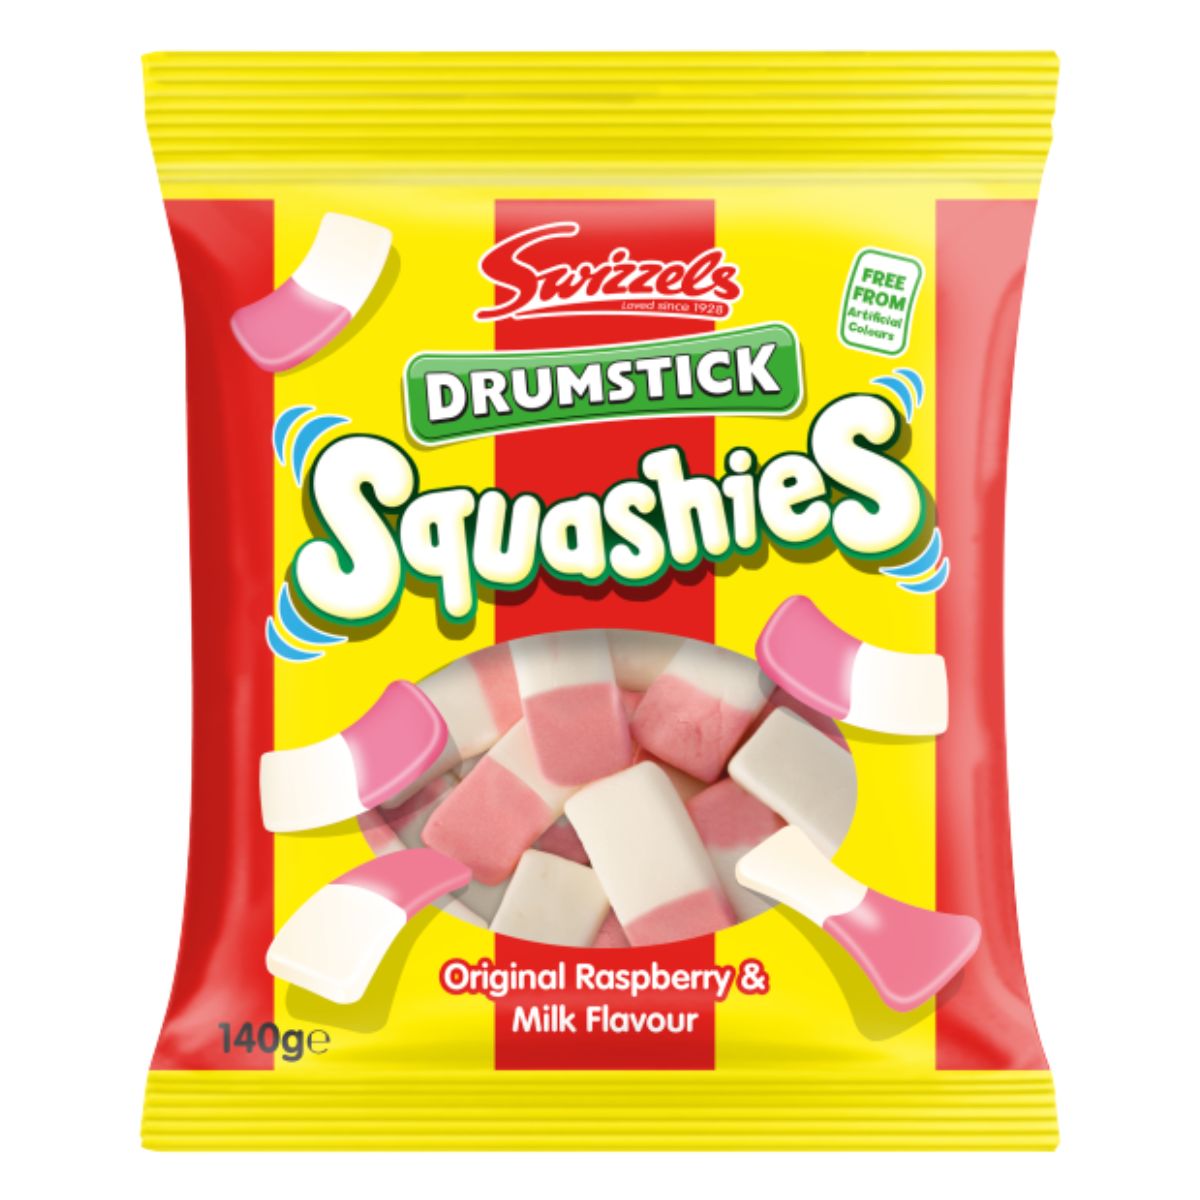 A bag of Swizzels - Squashies Original - 140g on a white background.